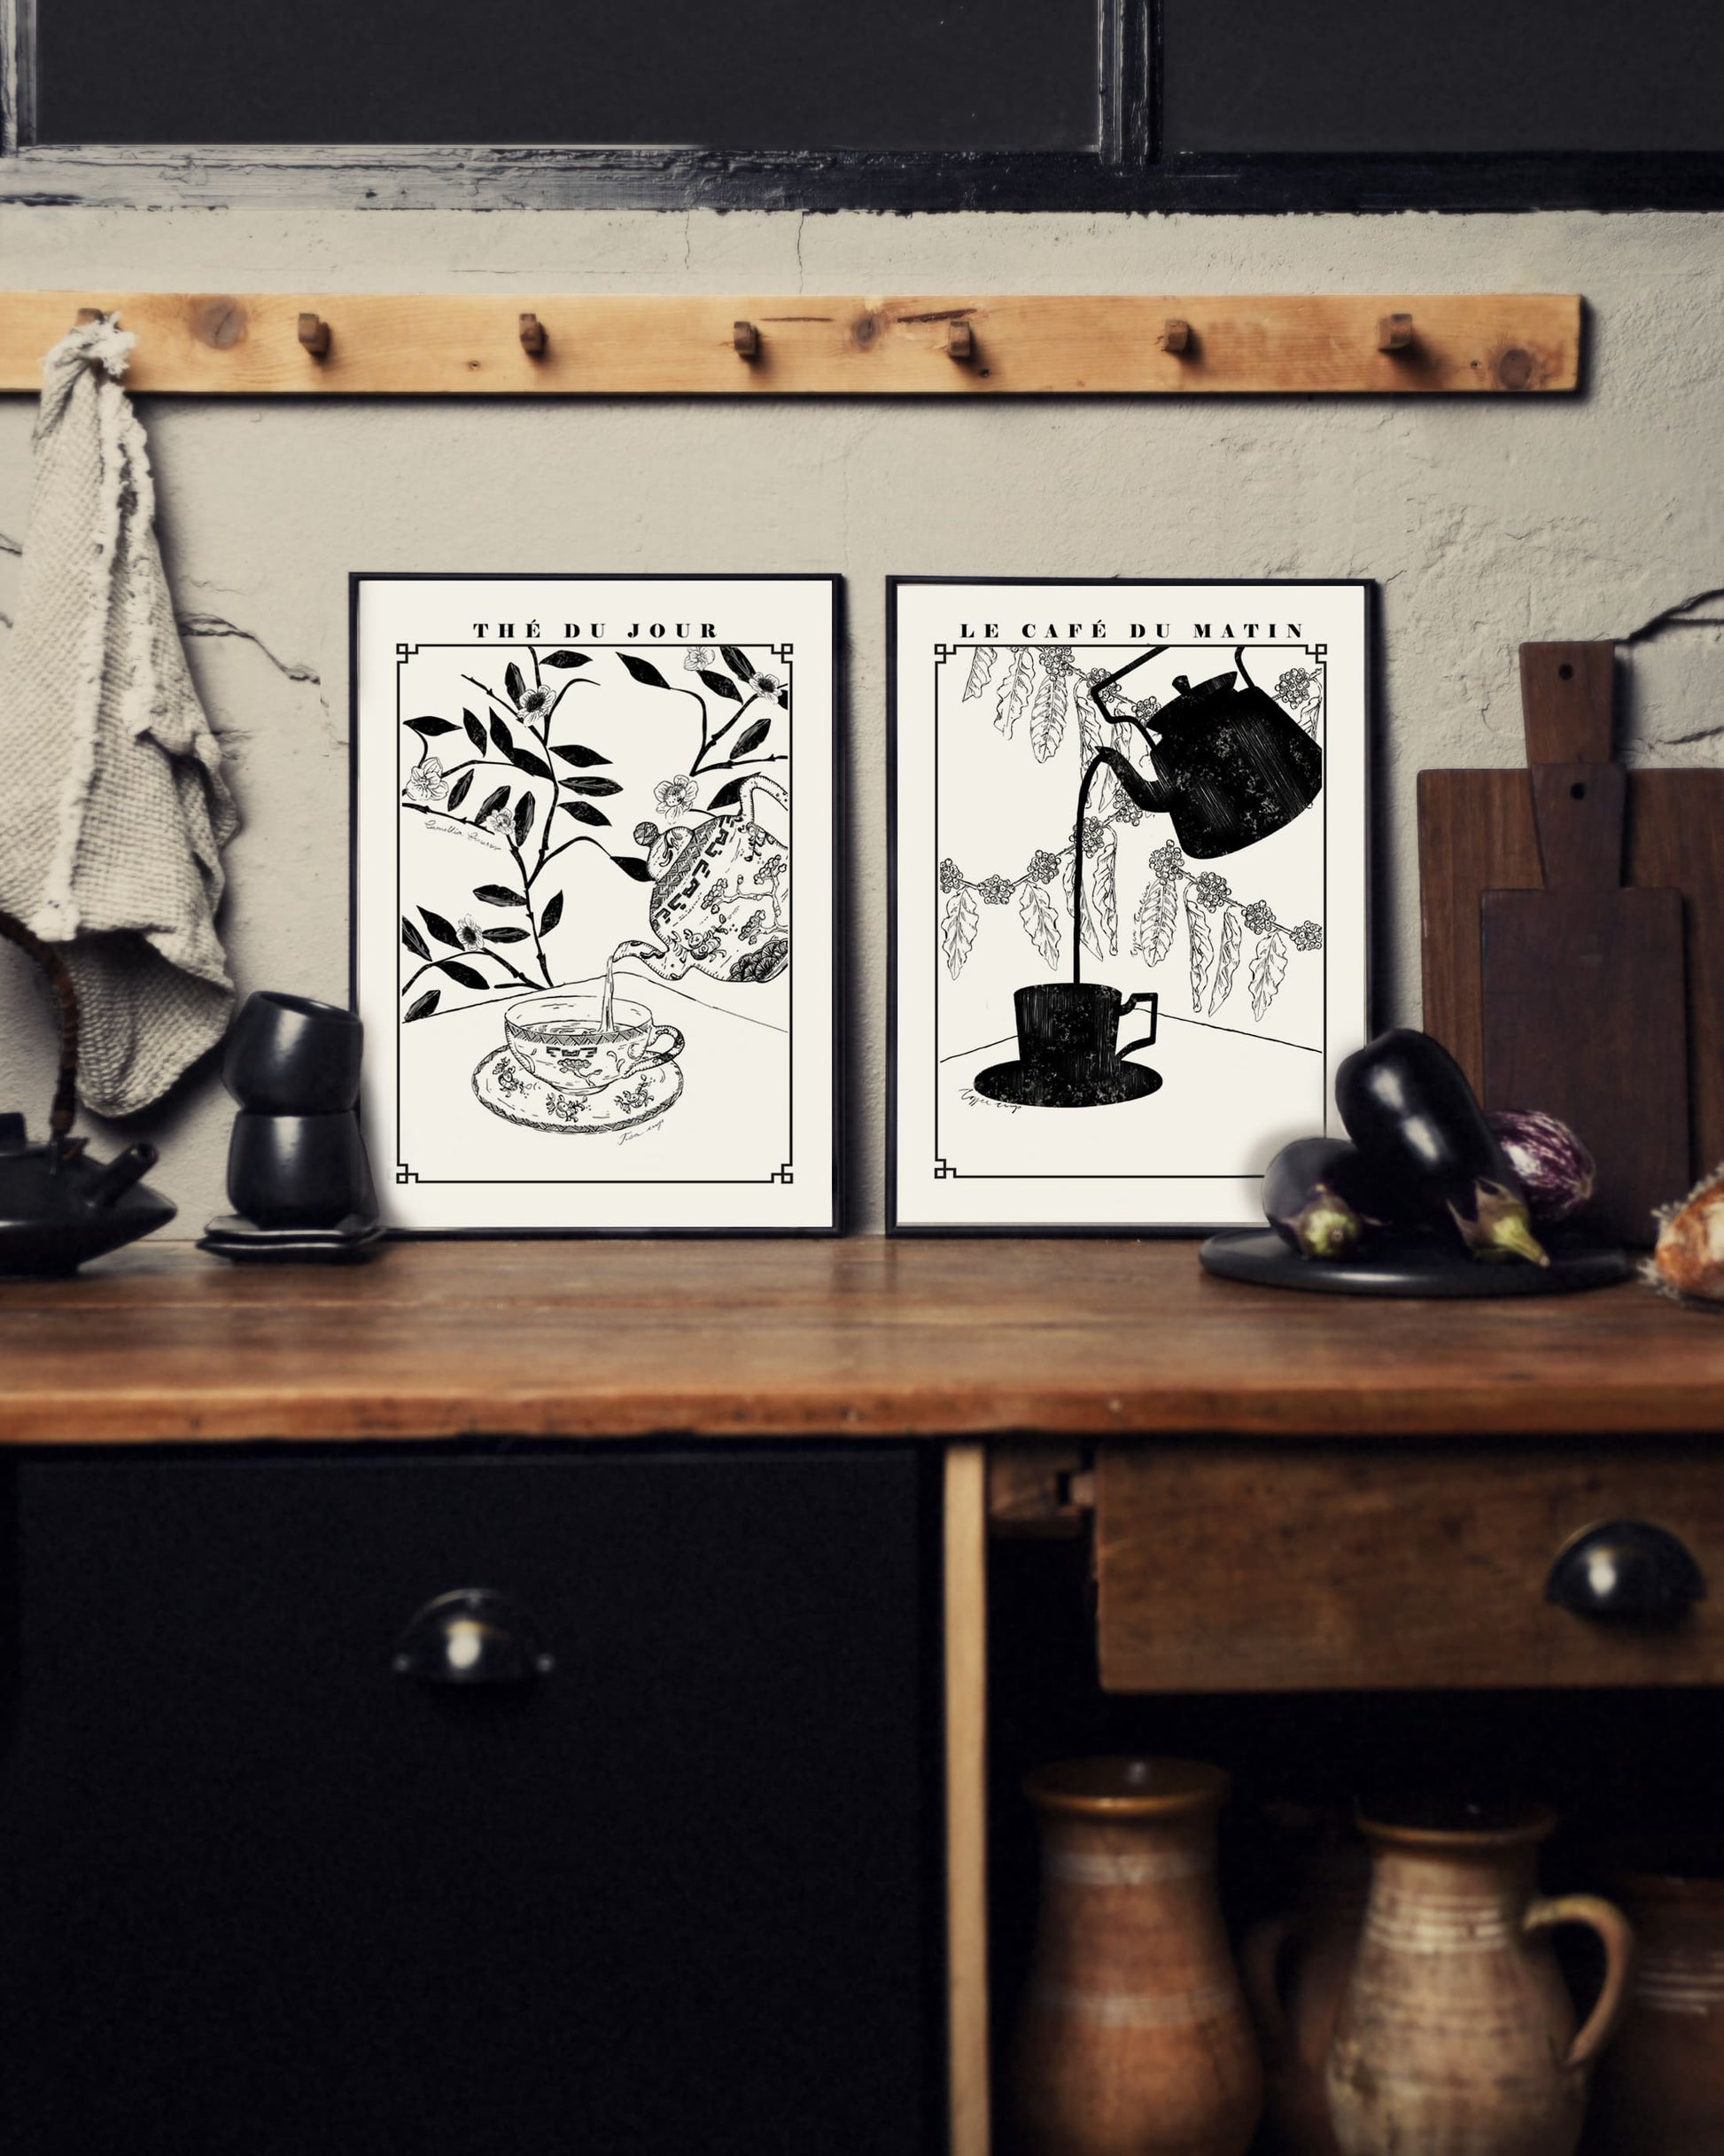 Thé du jour. Exclusive kitchen posters. Tea poster. Premium quality art prints, printed on environmentally friendly FSC marked paper. 